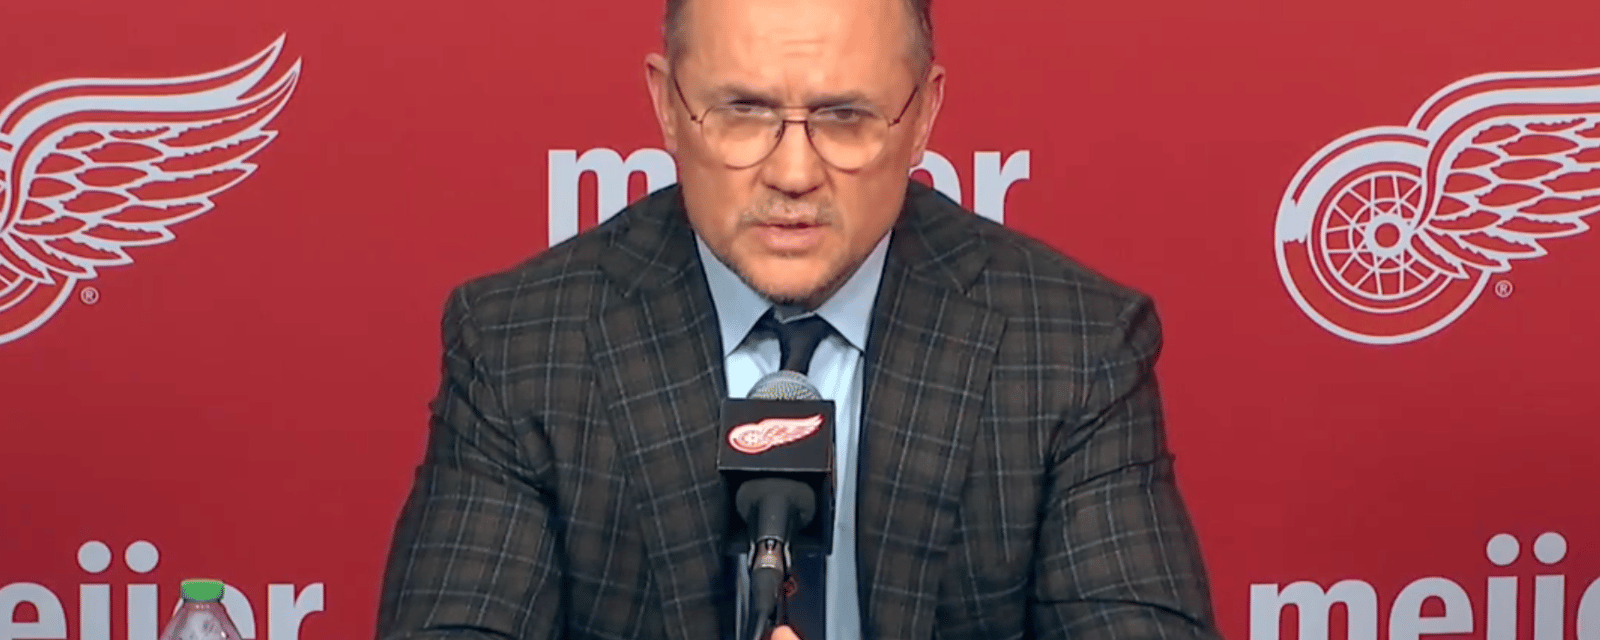 Steve Yzerman: “I'm okay with where we're at” 